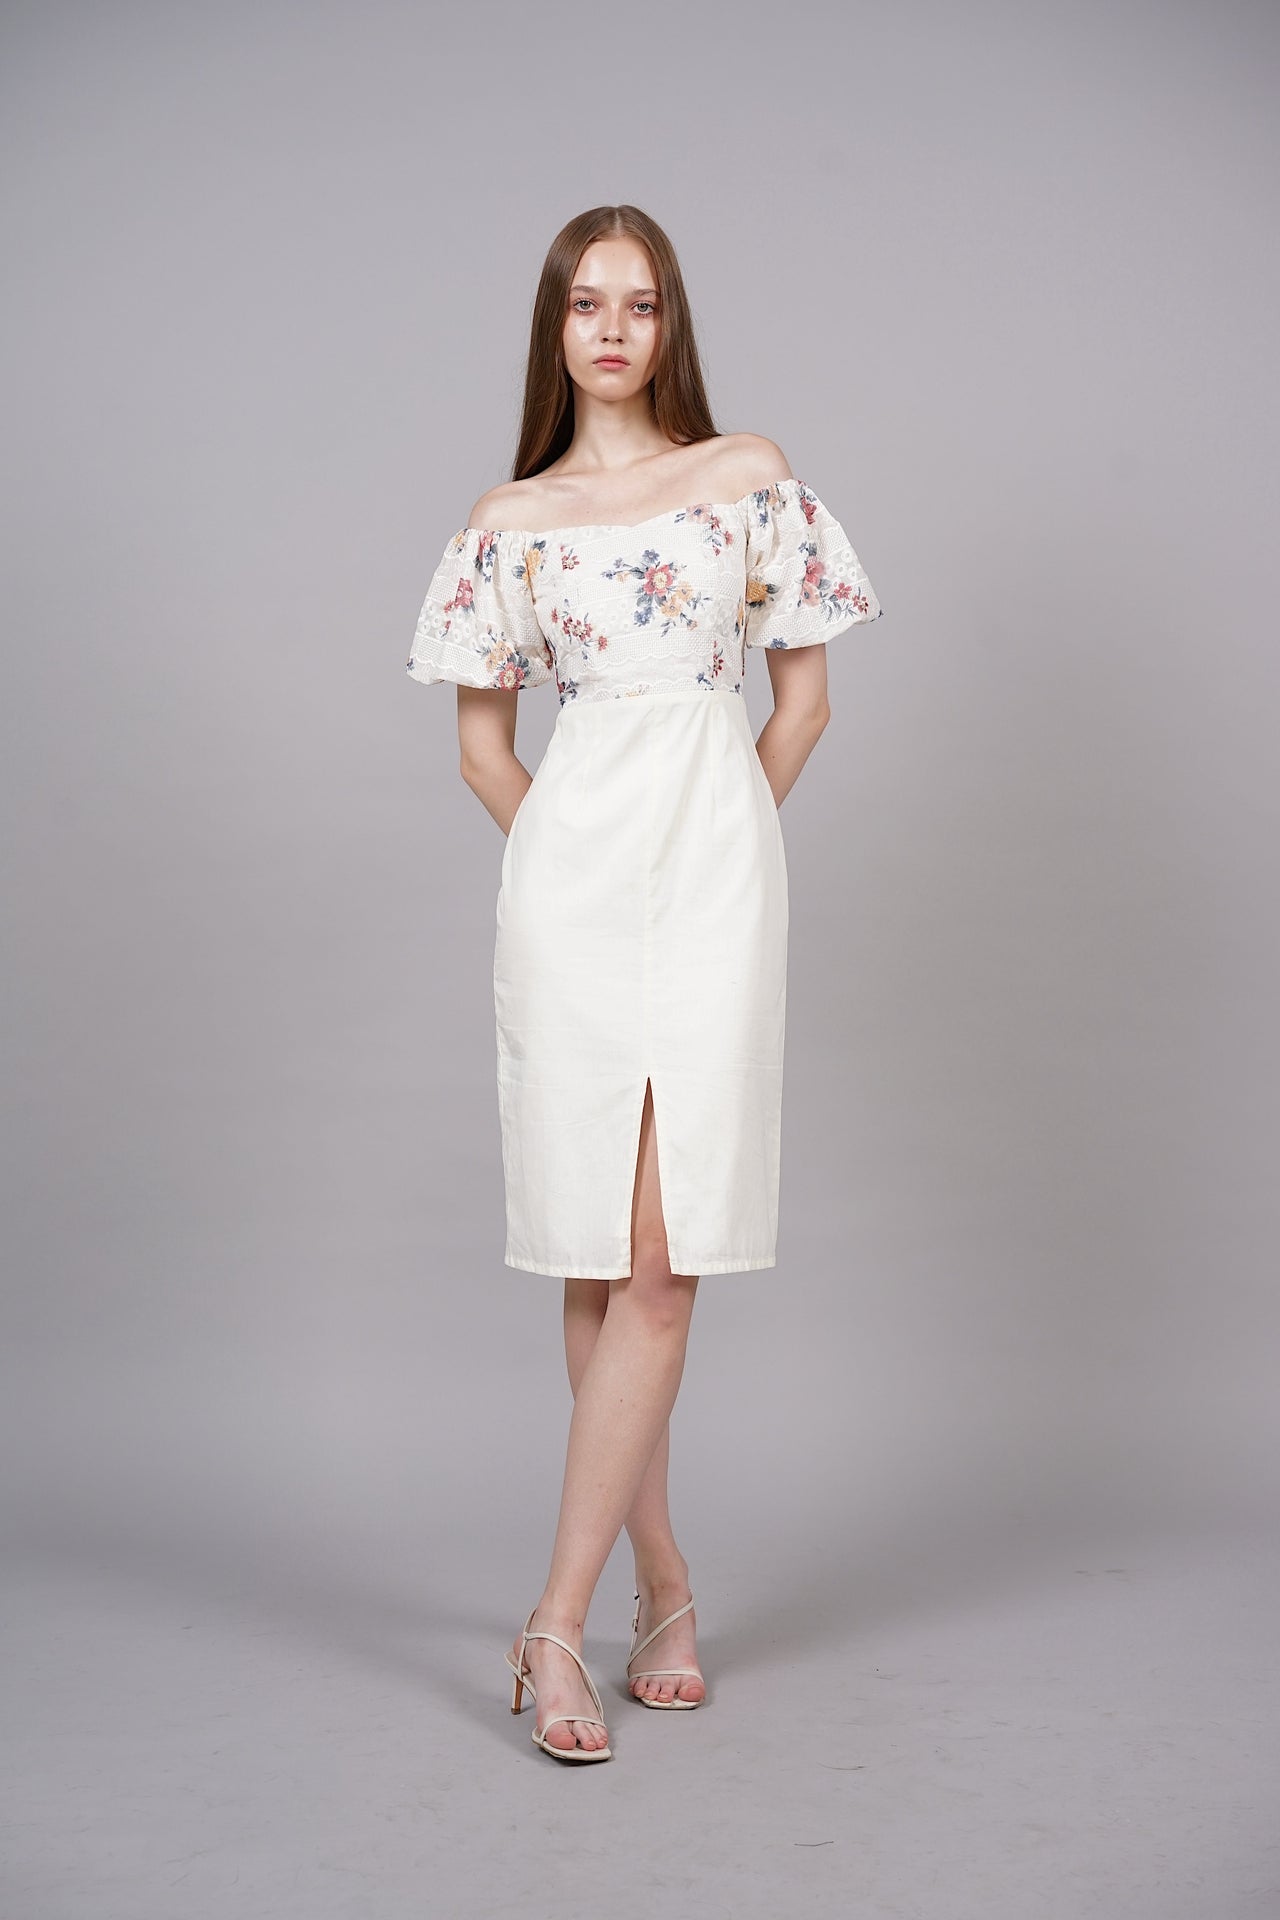 Contrast Eyelet Midi Dress in White Floral - Arriving Soon